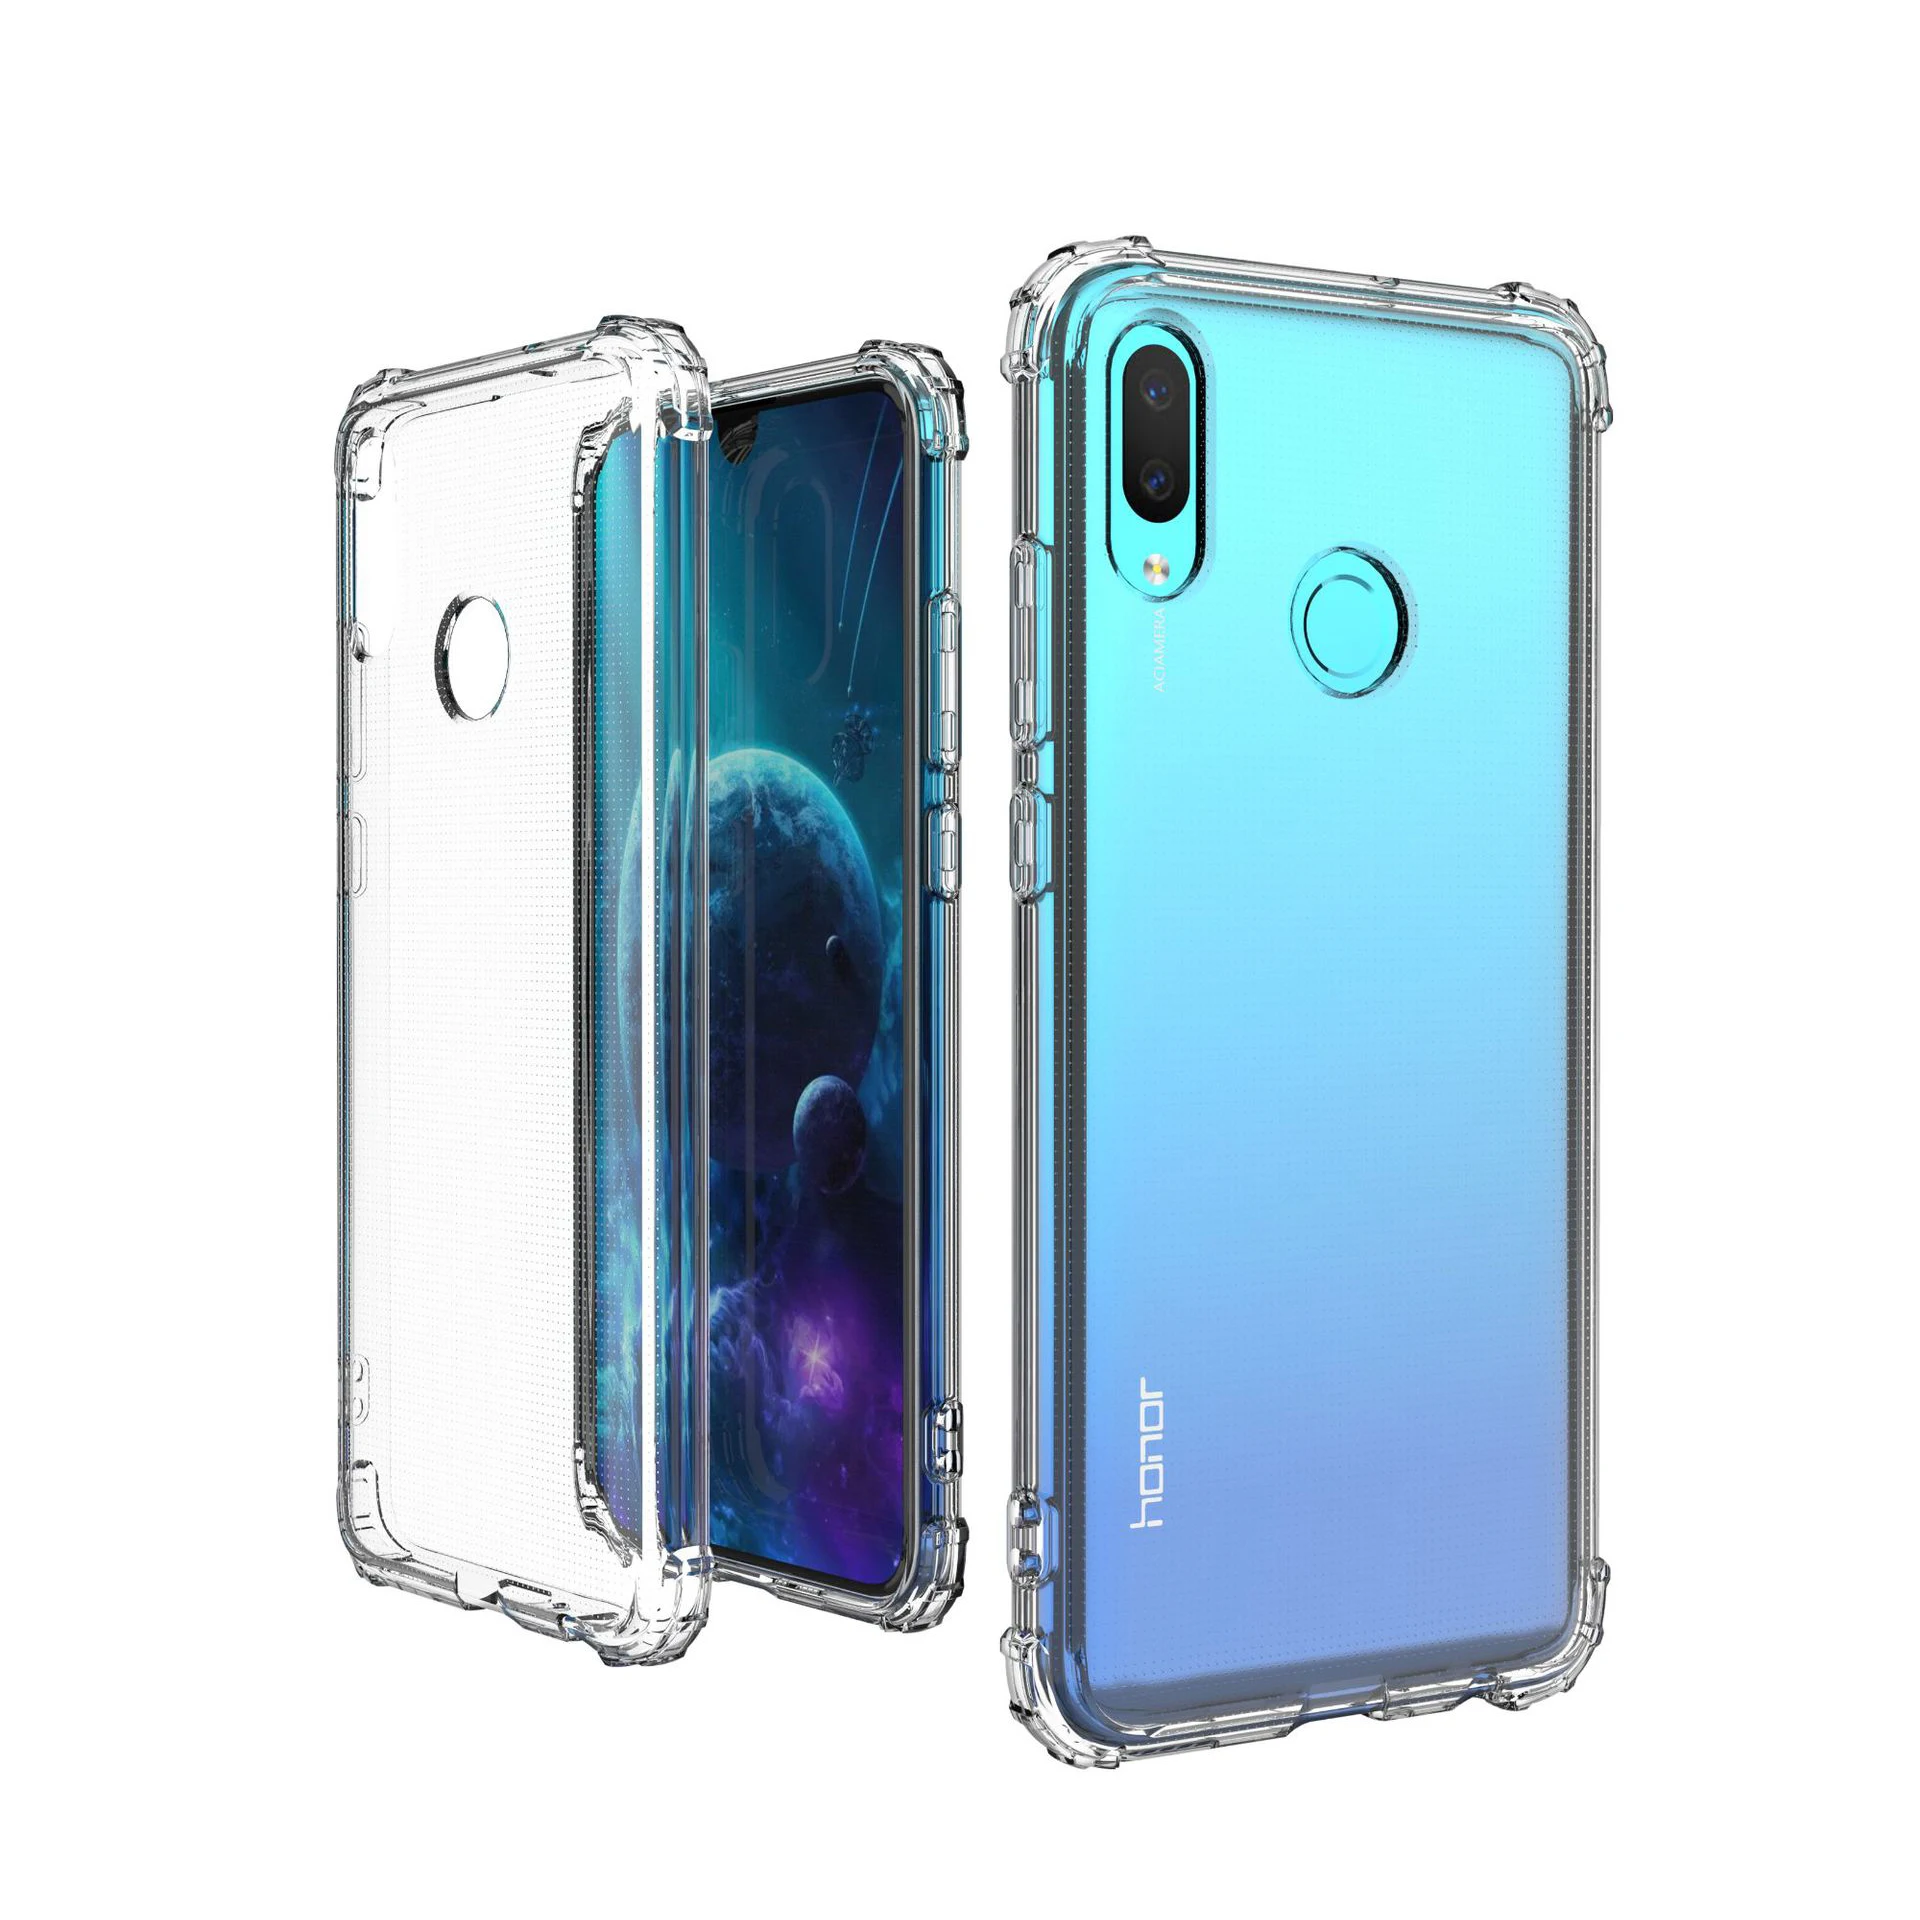 Source Low Price Case Huawei P 2019 Shock Absorption Soft TPU Protective Shell Cell Phone Accessories Case on m.alibaba.com